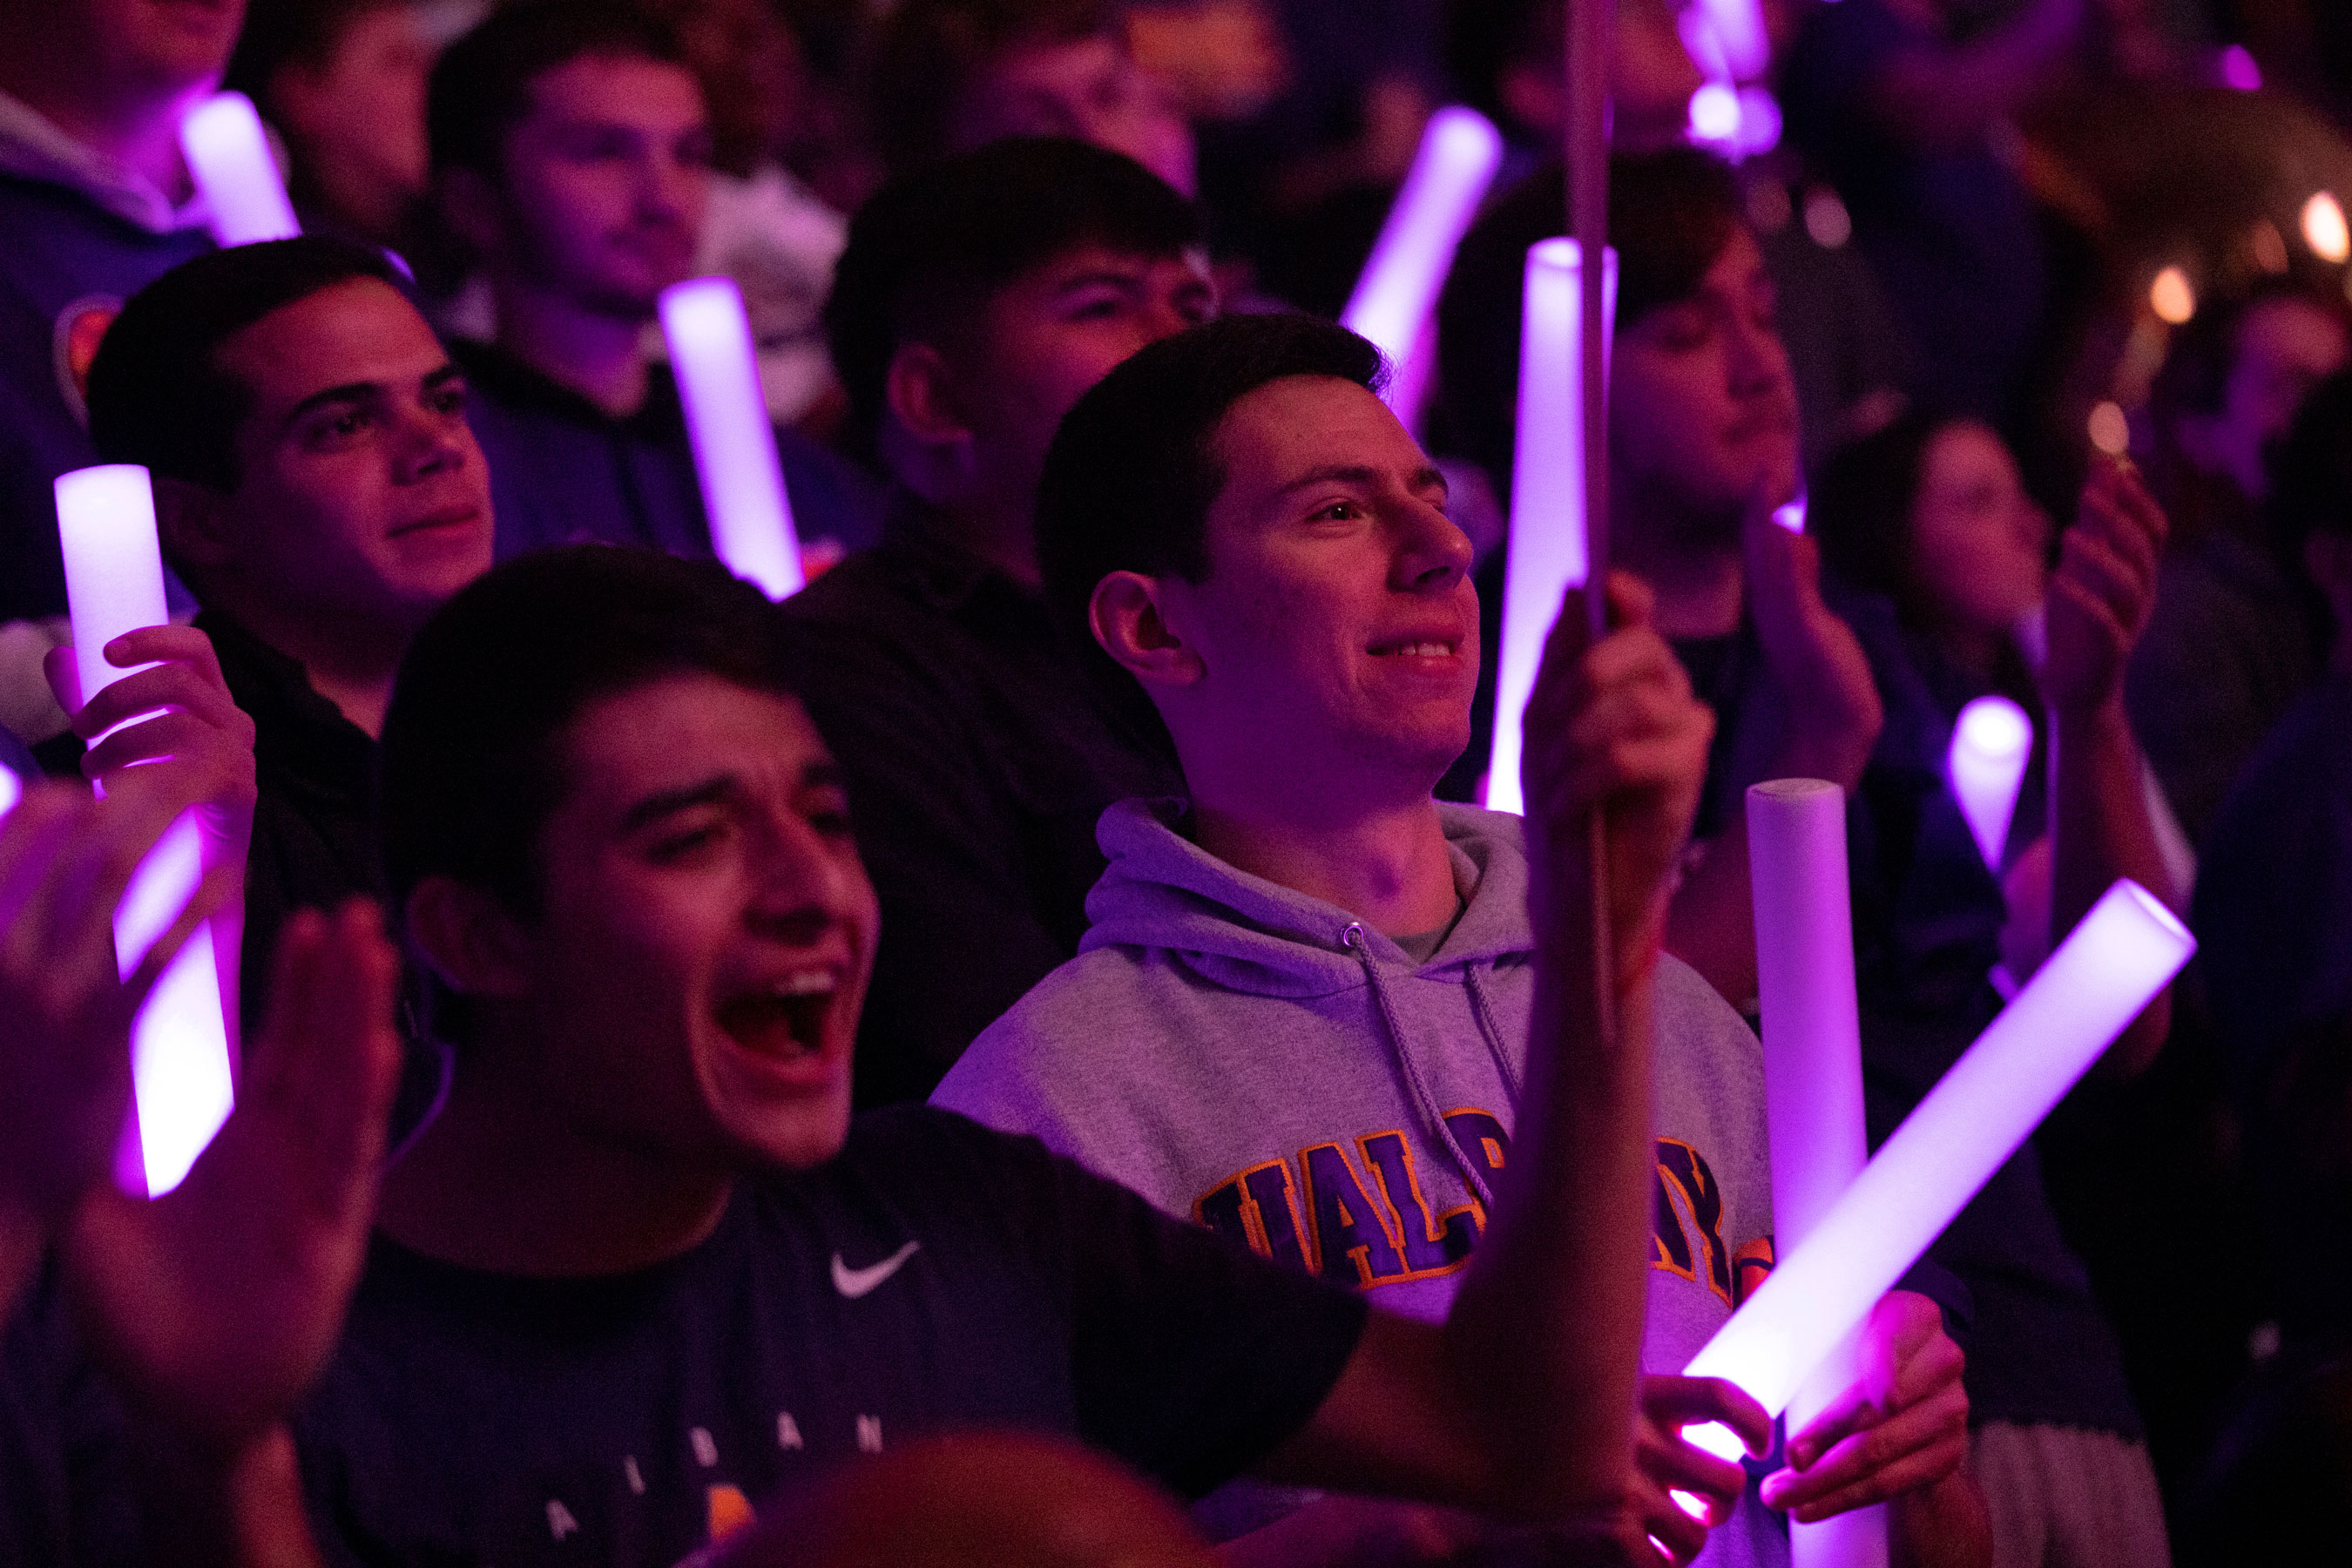 Students hold purple glow sticks as they stand and cheer for a UAlbany team.